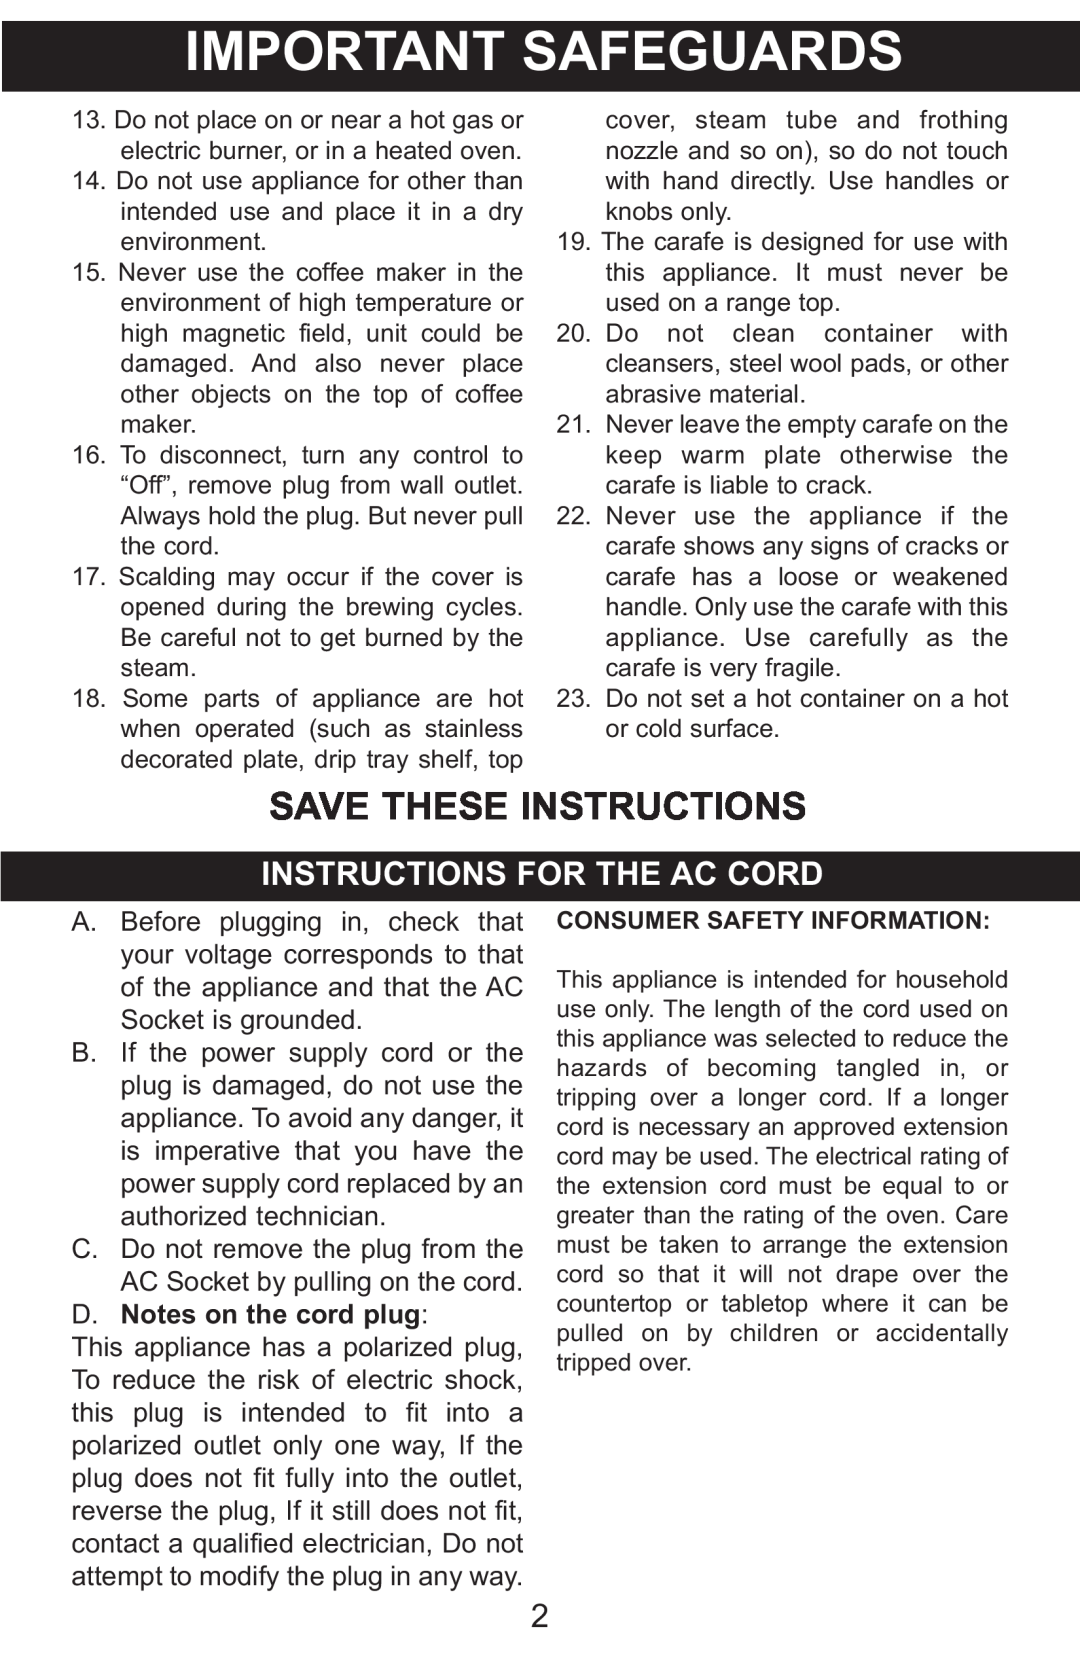 Emerson CCM901 Instructions For The Ac Cord, Important Safeguards, Save These Instructions, D. Notes on the cord plug 